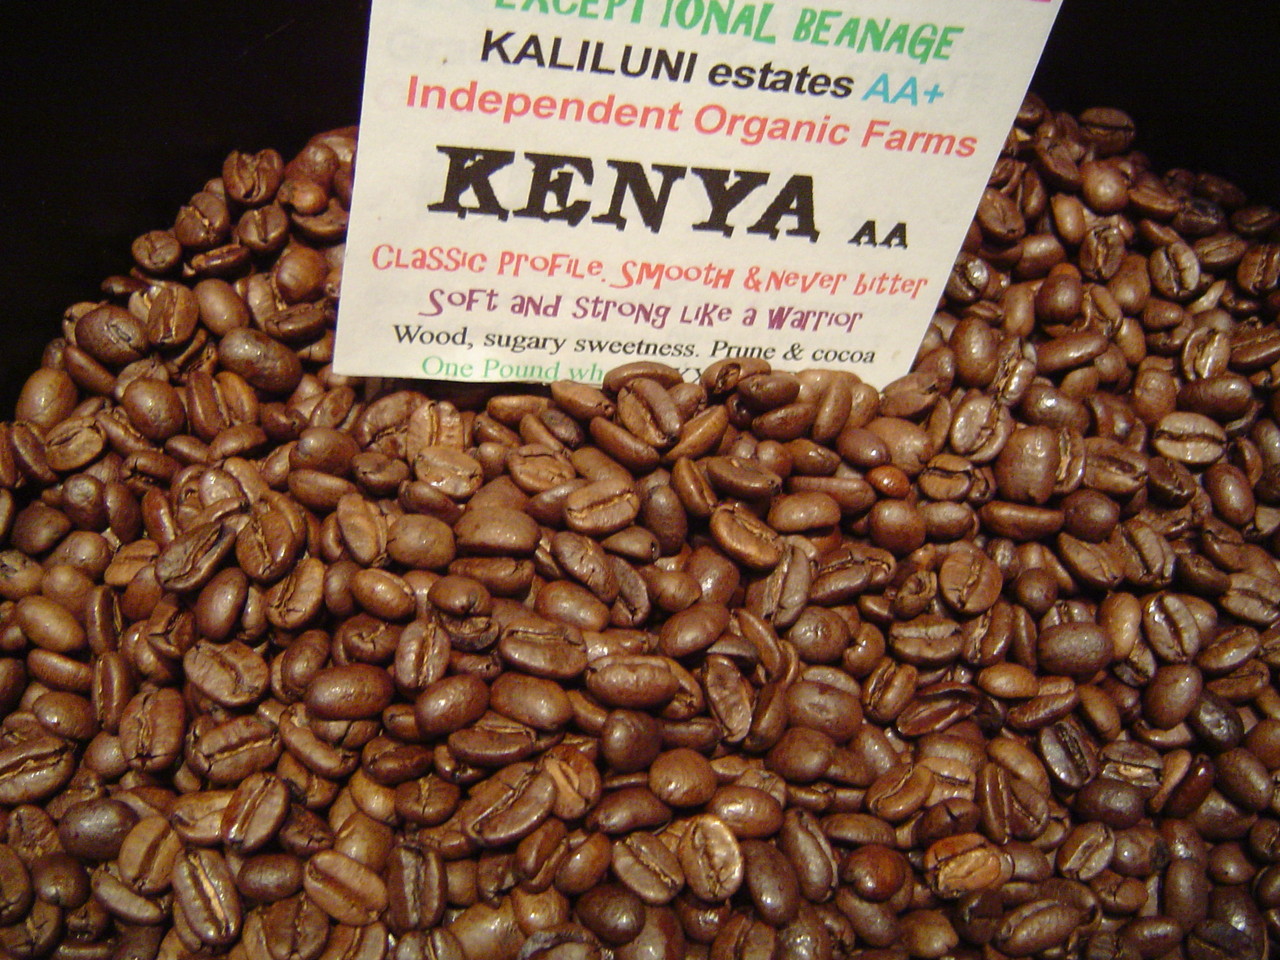 Beans of Kenyan coffee, one of the top Kenyan exports, on display